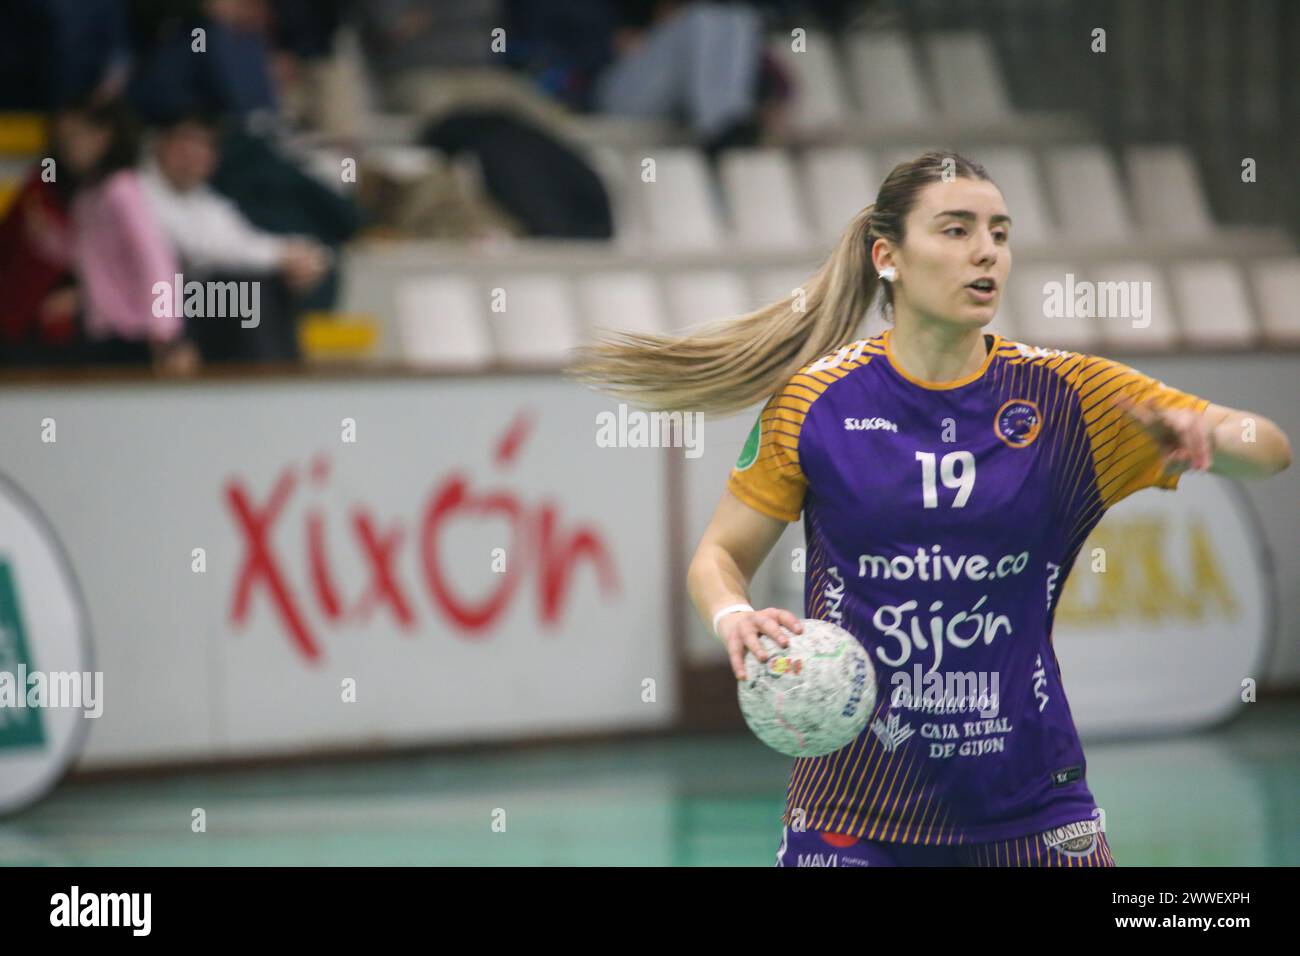 Gijón, Spain, 23th March, 2024: The player of Motive.co Gijón Balonmano La Calzada, Marta da Silva (19) with the ball during the 22nd matchday of the Liga Guerreras Iberdrola 2023-24 between Motive.co Gijón Balonmano La Calzada and the KH-7 BM. Granollers, on March 23, 2024, at the La Arena Pavilion, in Gijón, Spain. Credit: Alberto Brevers / Alamy Live News. Stock Photo